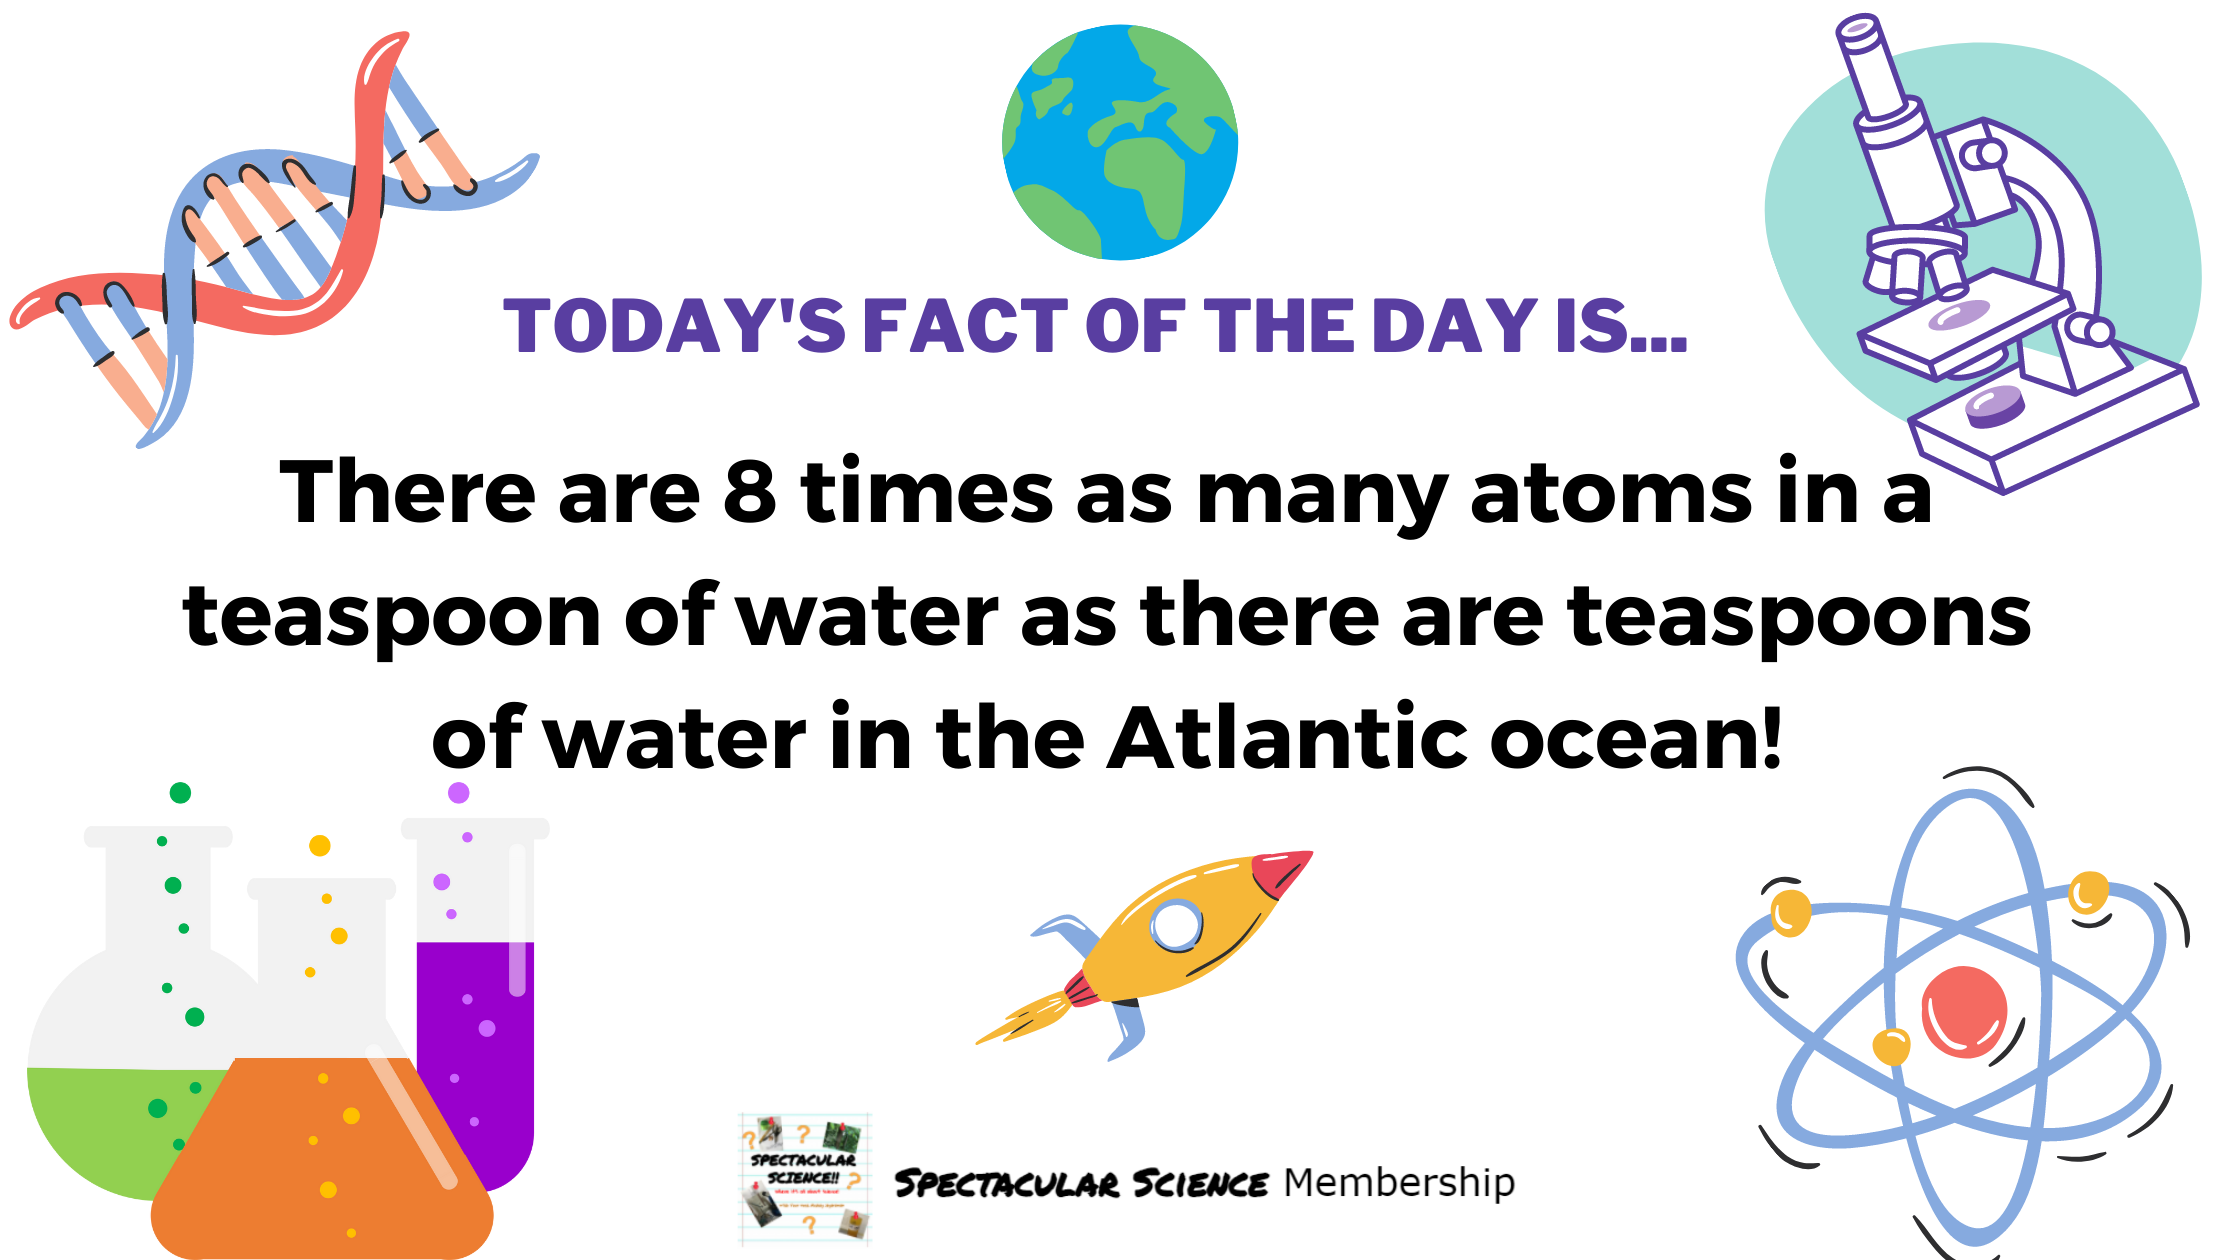 Fact of the Day Image Nov. 18th